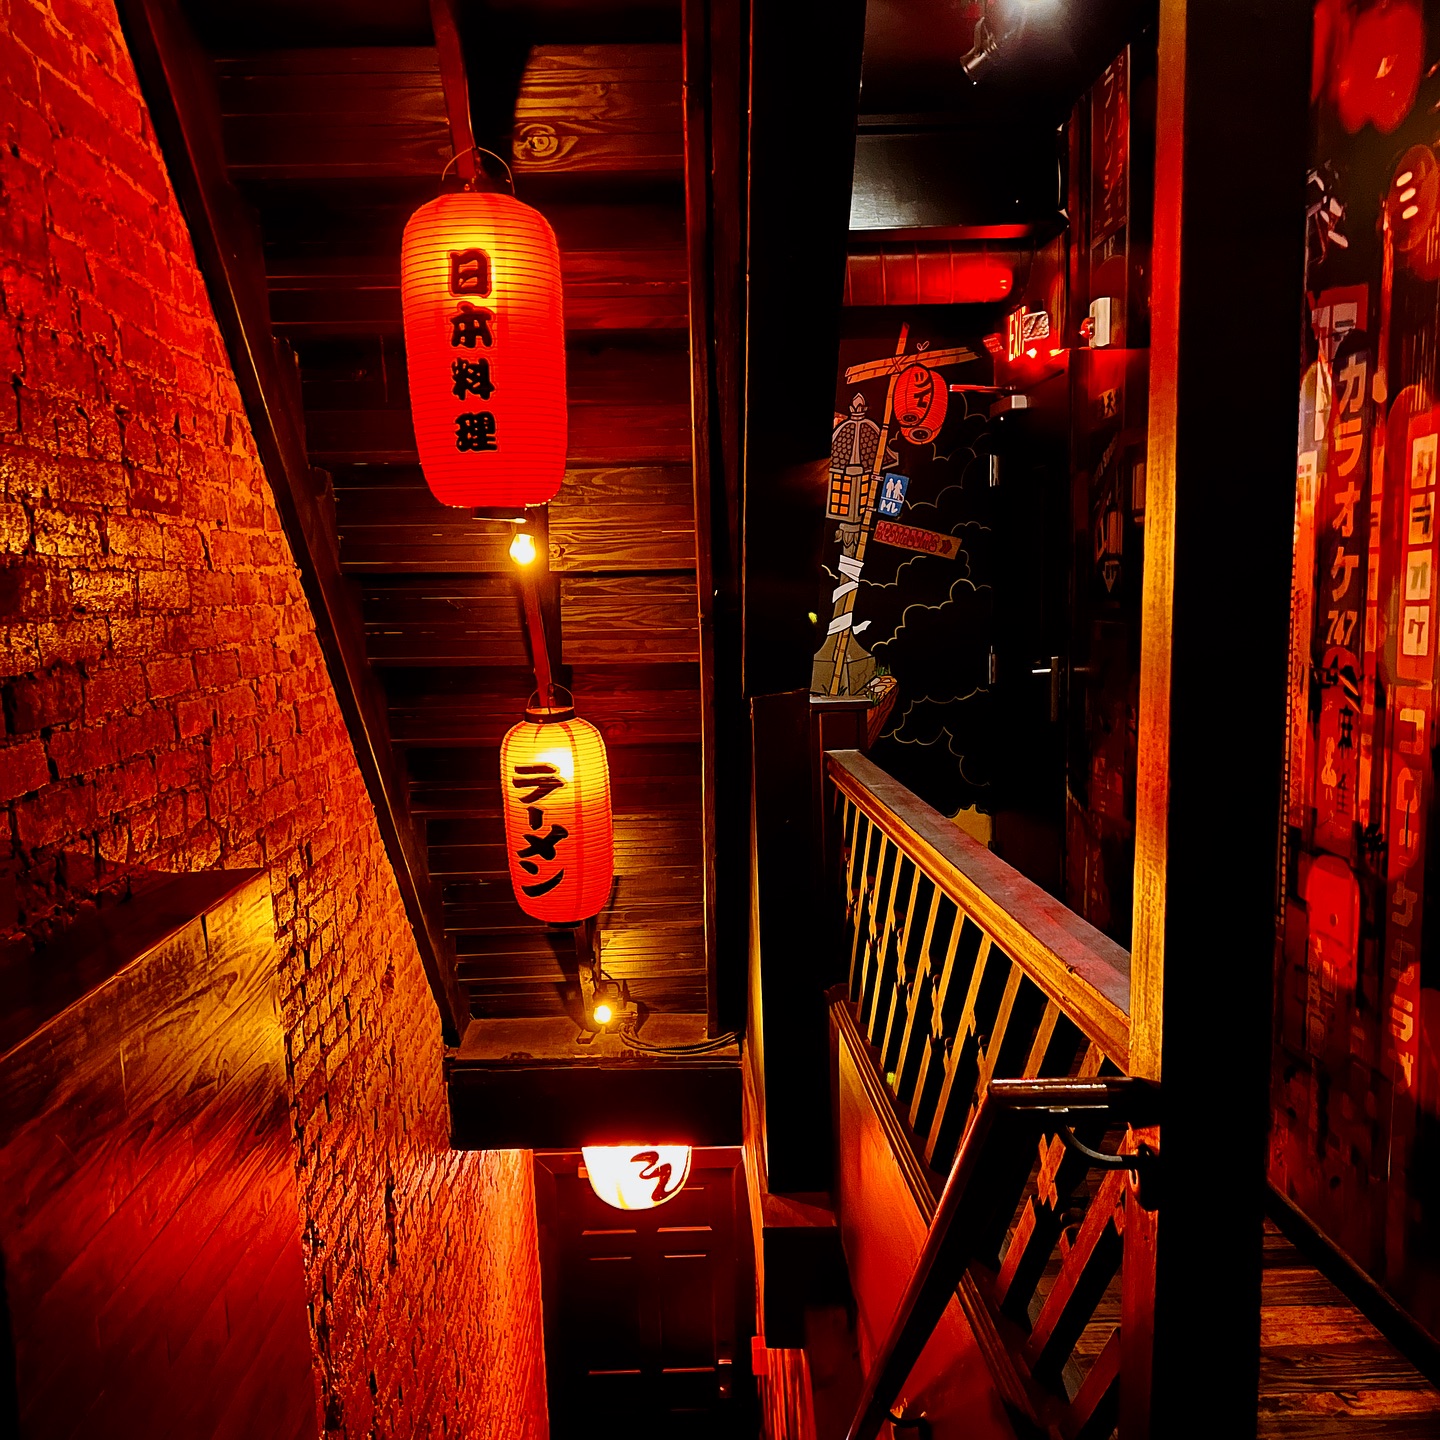 A photo of the inside of UmamiPGH. Red lighting is prominent, with traditional Japanese decorations.